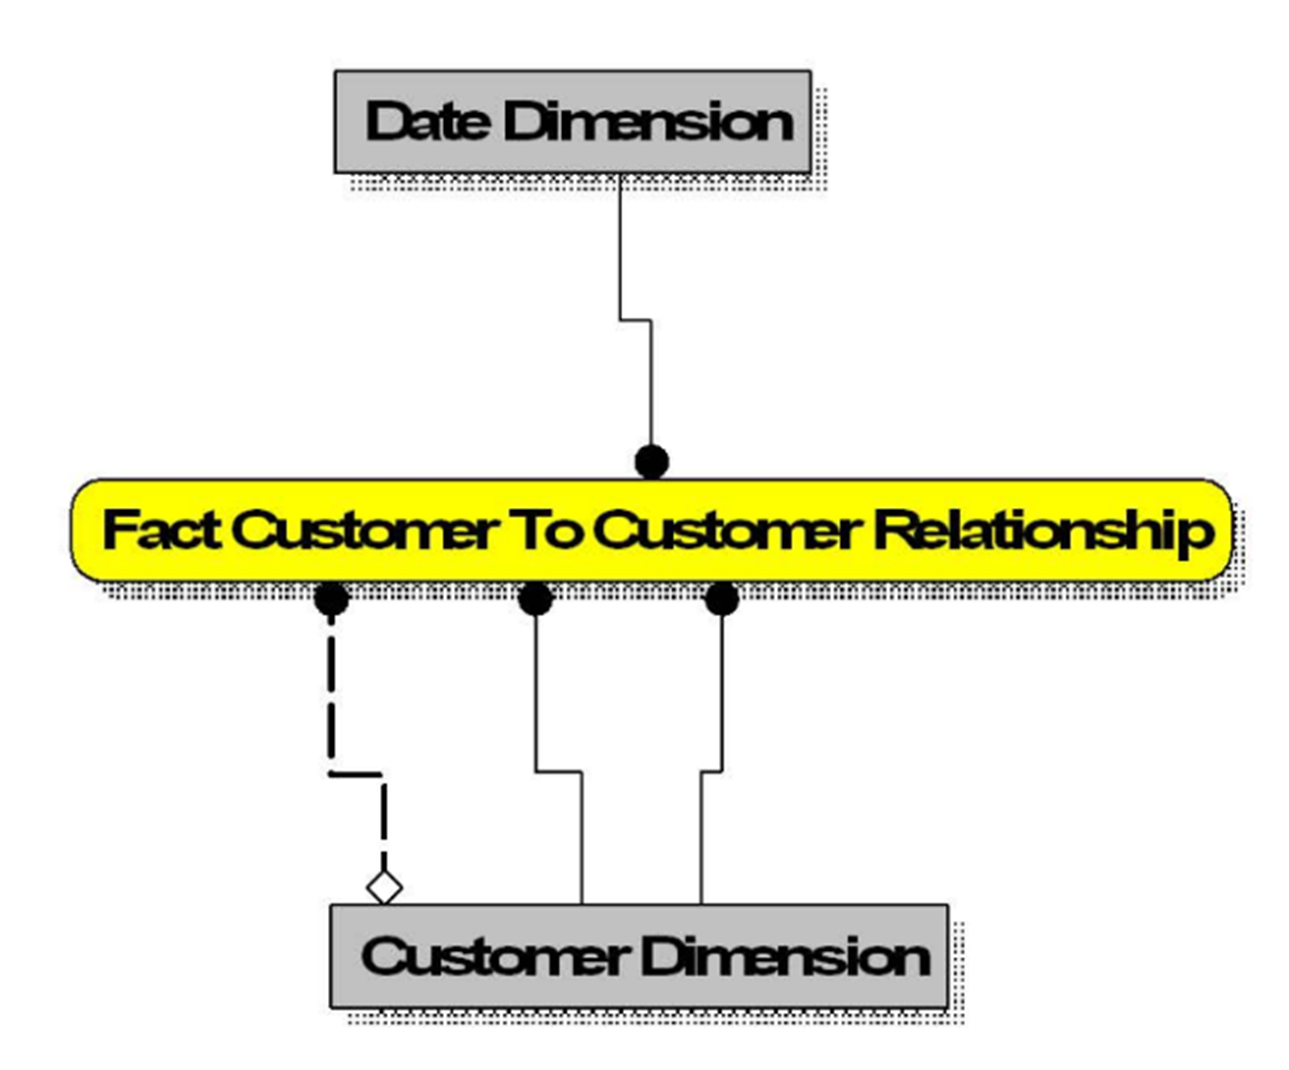 This illustration depicts the Fact Customer-toCustomer Relationship.